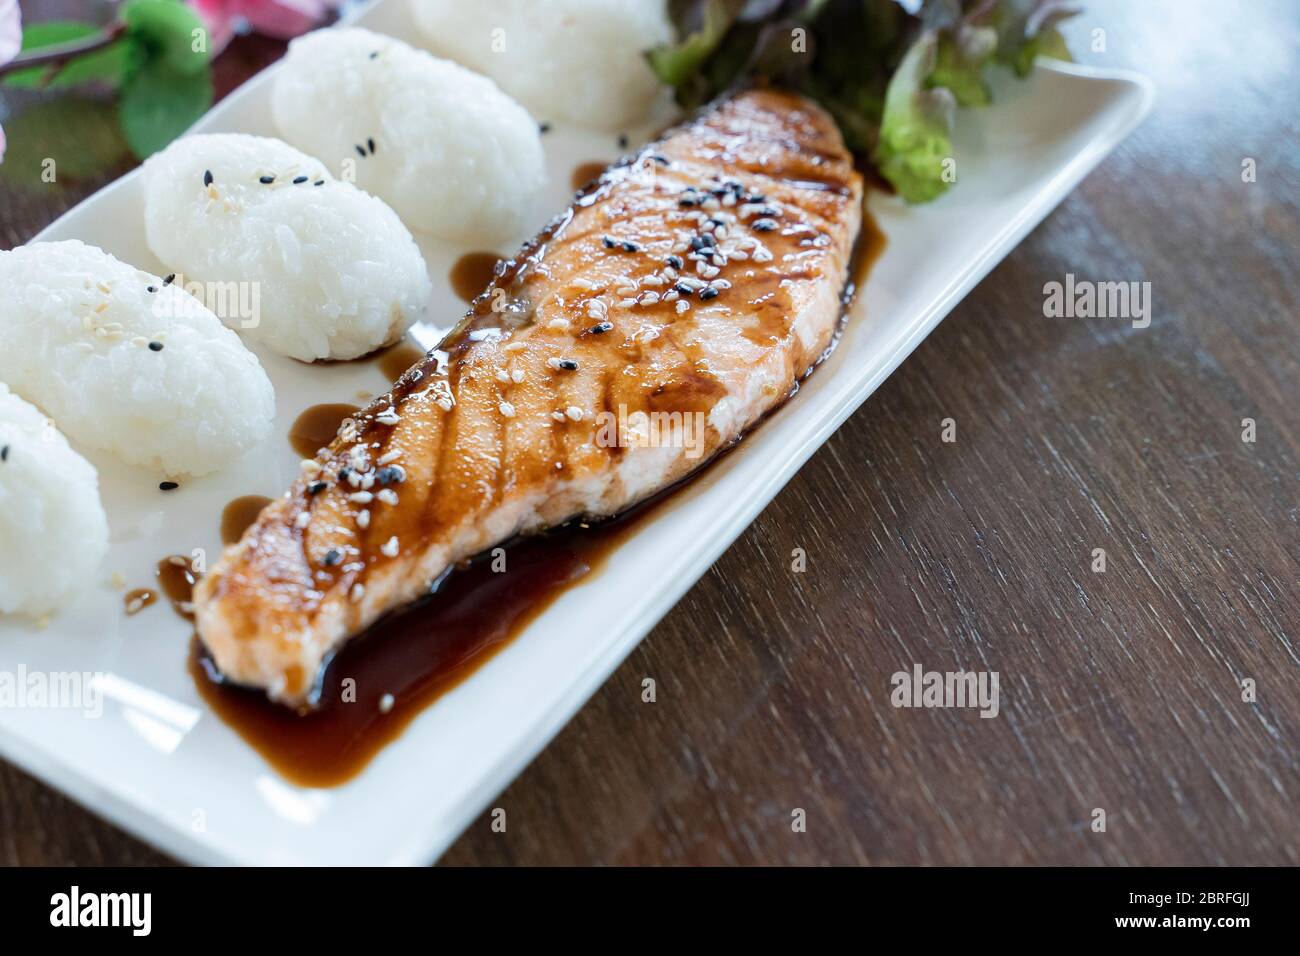 Salmon fillet topped with tare sauce and rice. Stock Photo